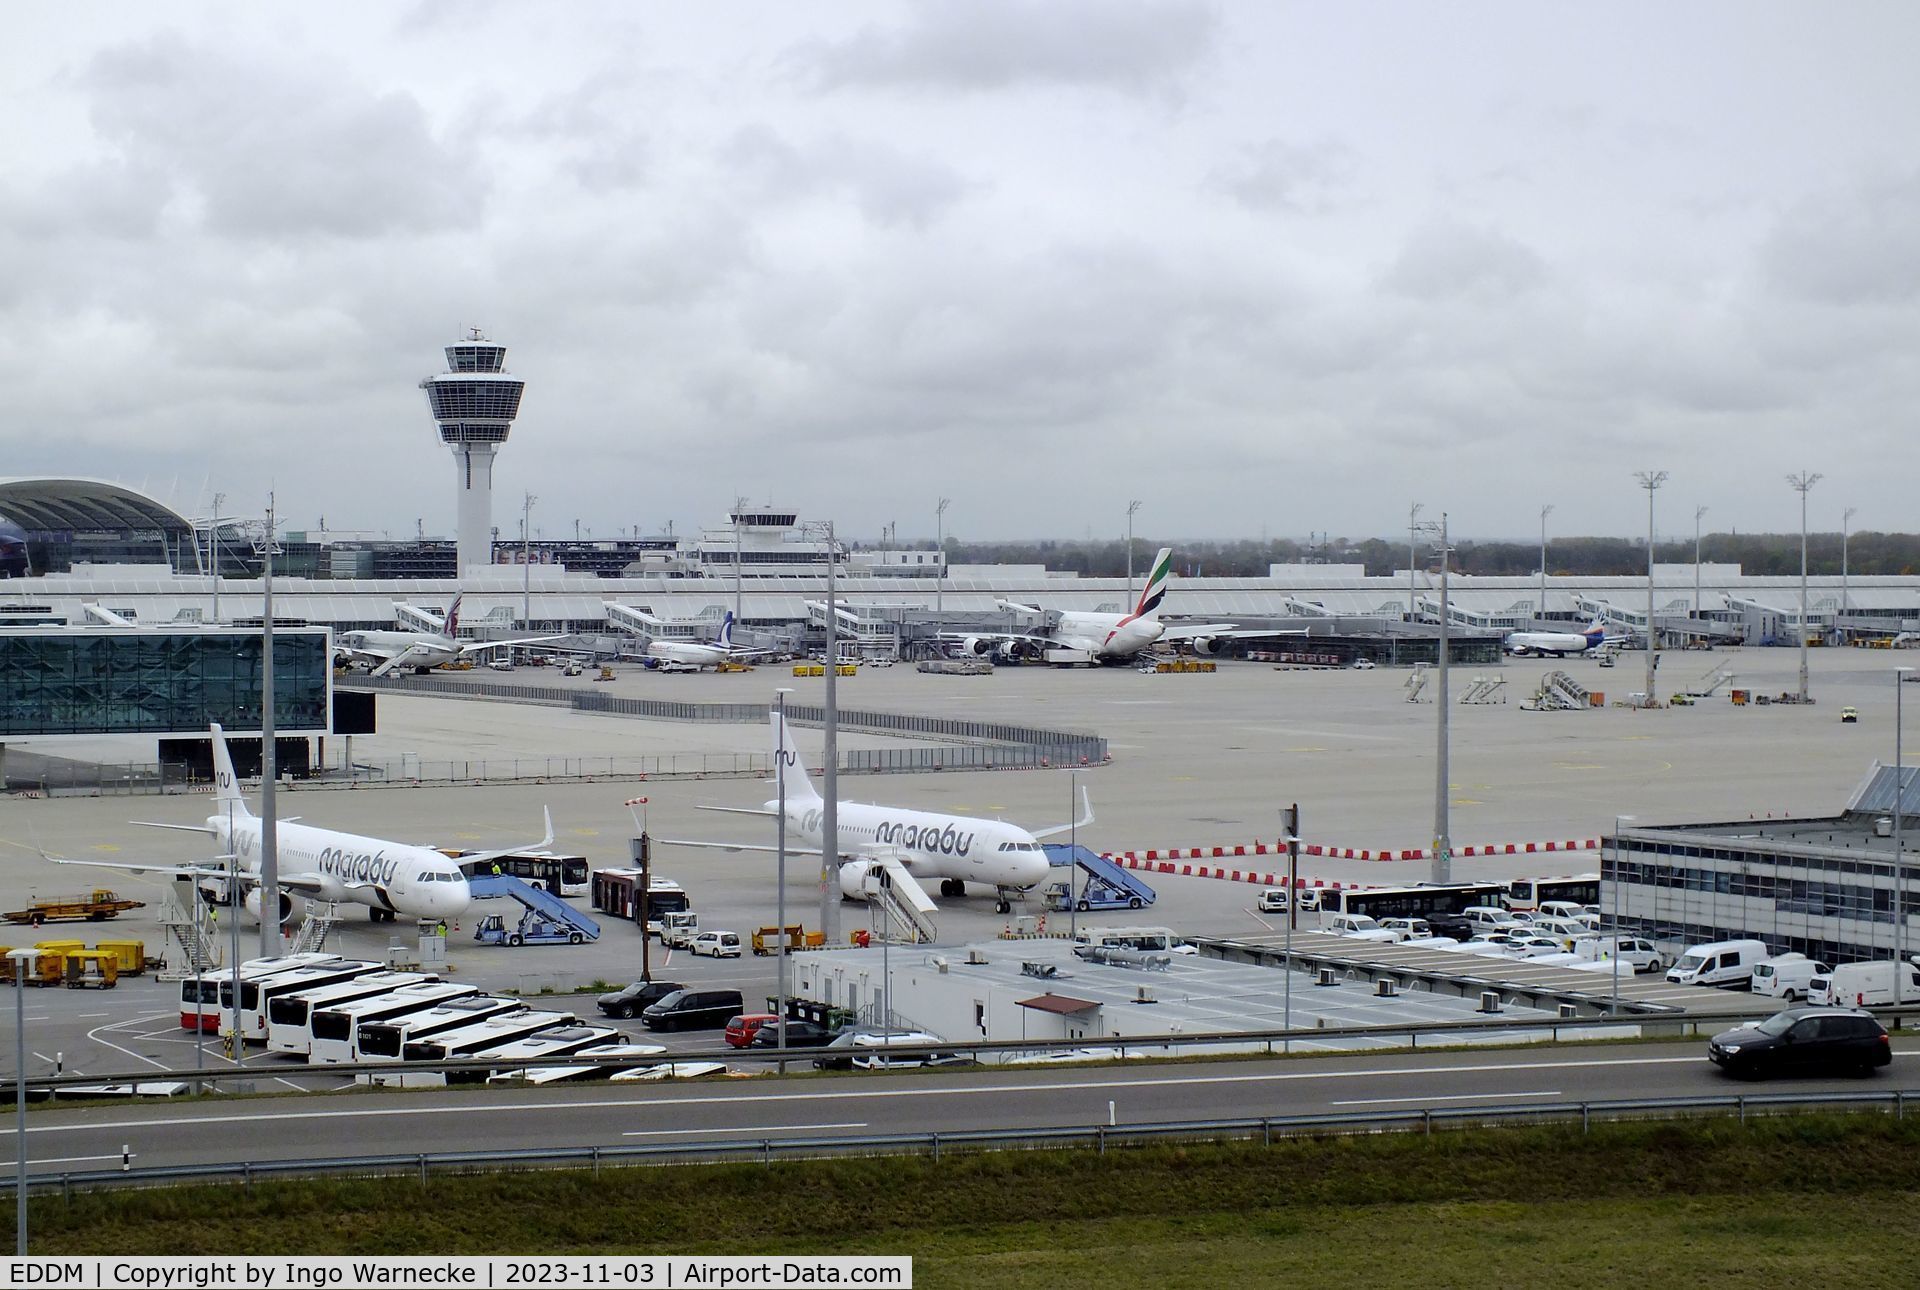 Munich International Airport (Franz Josef Strauß International Airport), Munich Germany (EDDM) - tower and parts of terminal building and apron of Munich airport